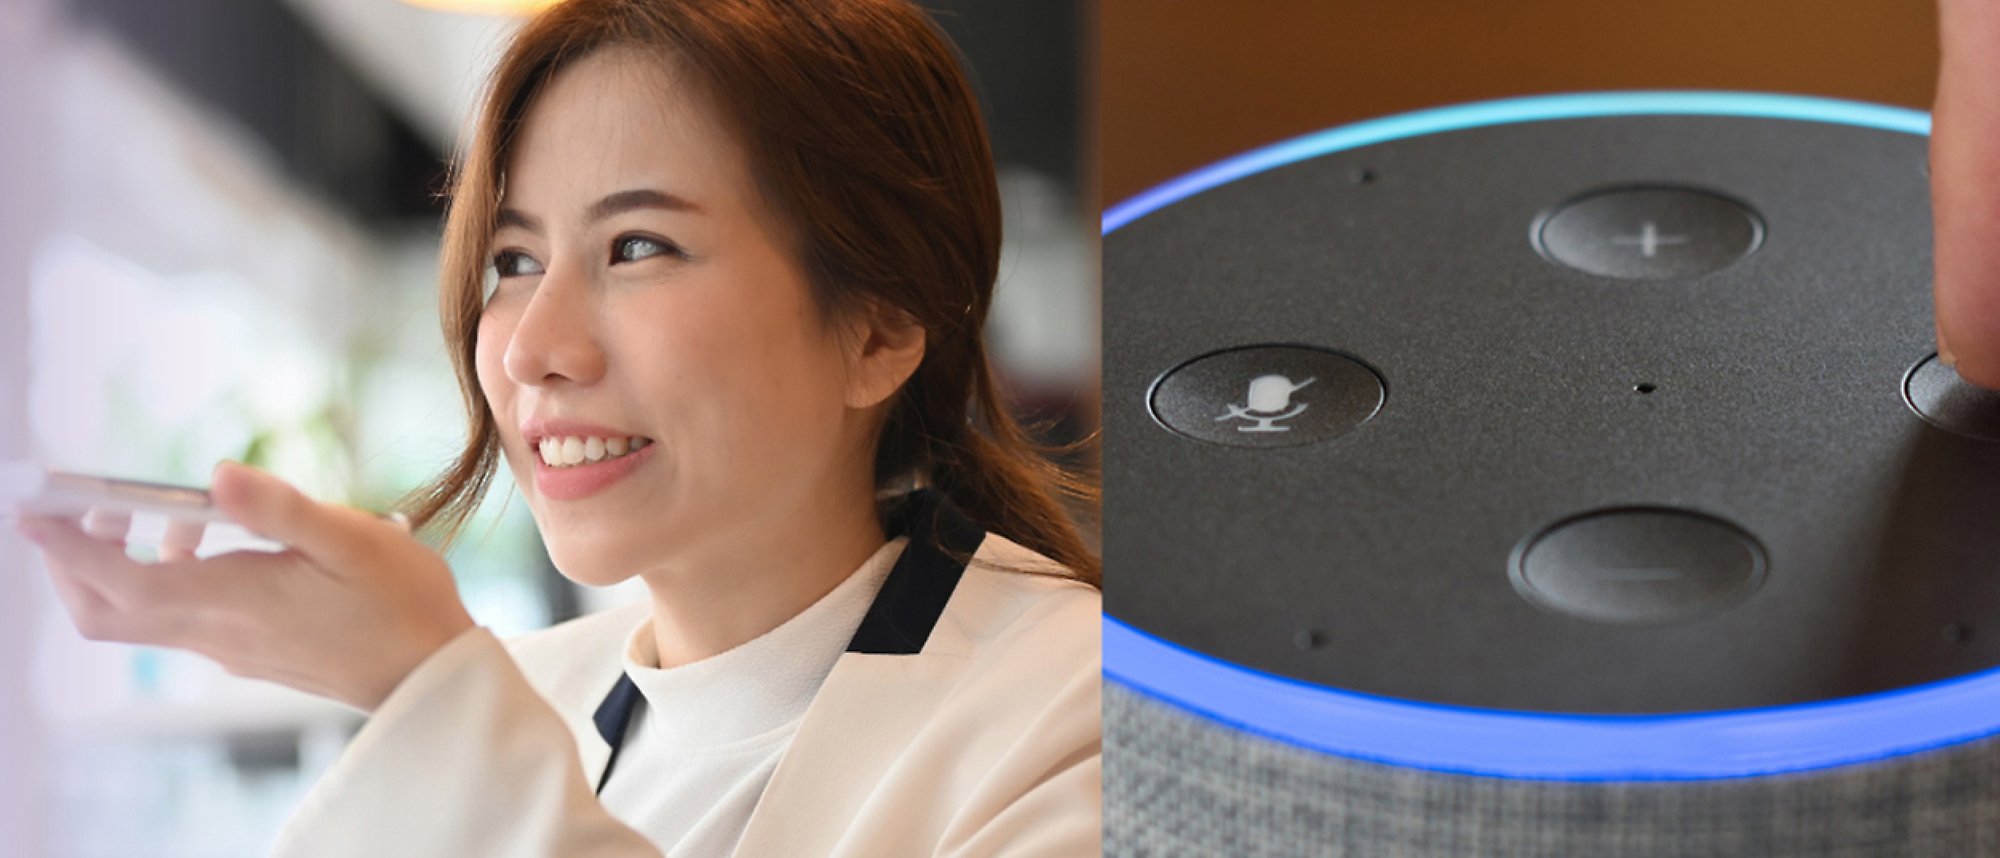 A woman talking over a phone and an image of amazon Alexa with blue lights and the sound controls